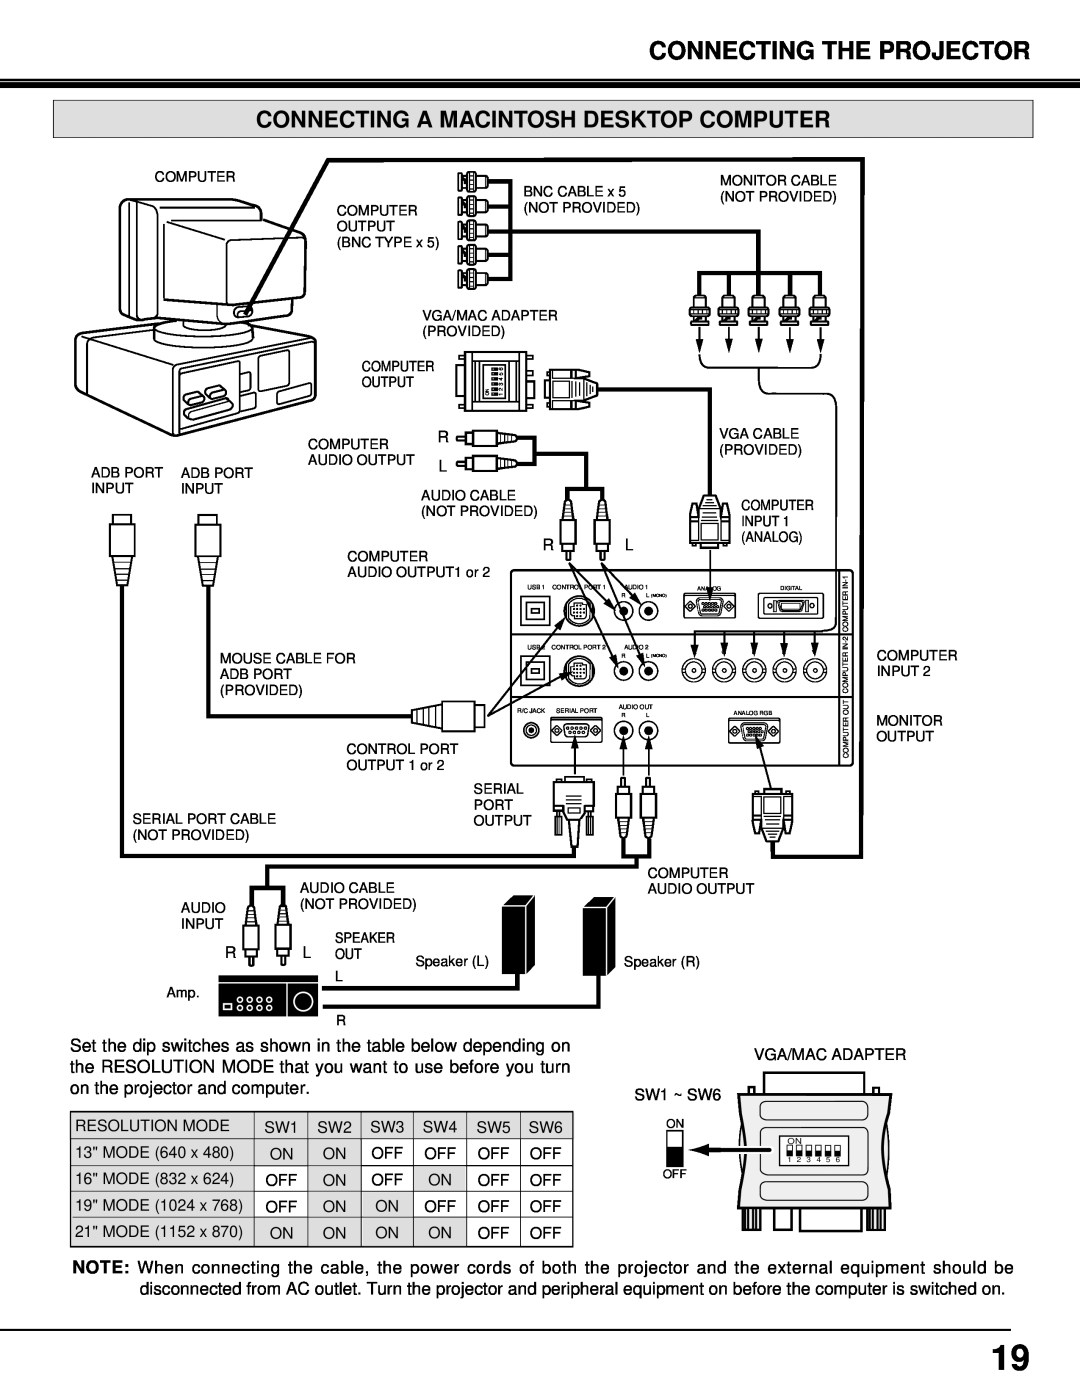 Eiki LC-X3/X3L instruction manual Connecting A Macintosh Desktop Computer, Connecting The Projector, Analog, Speaker L 